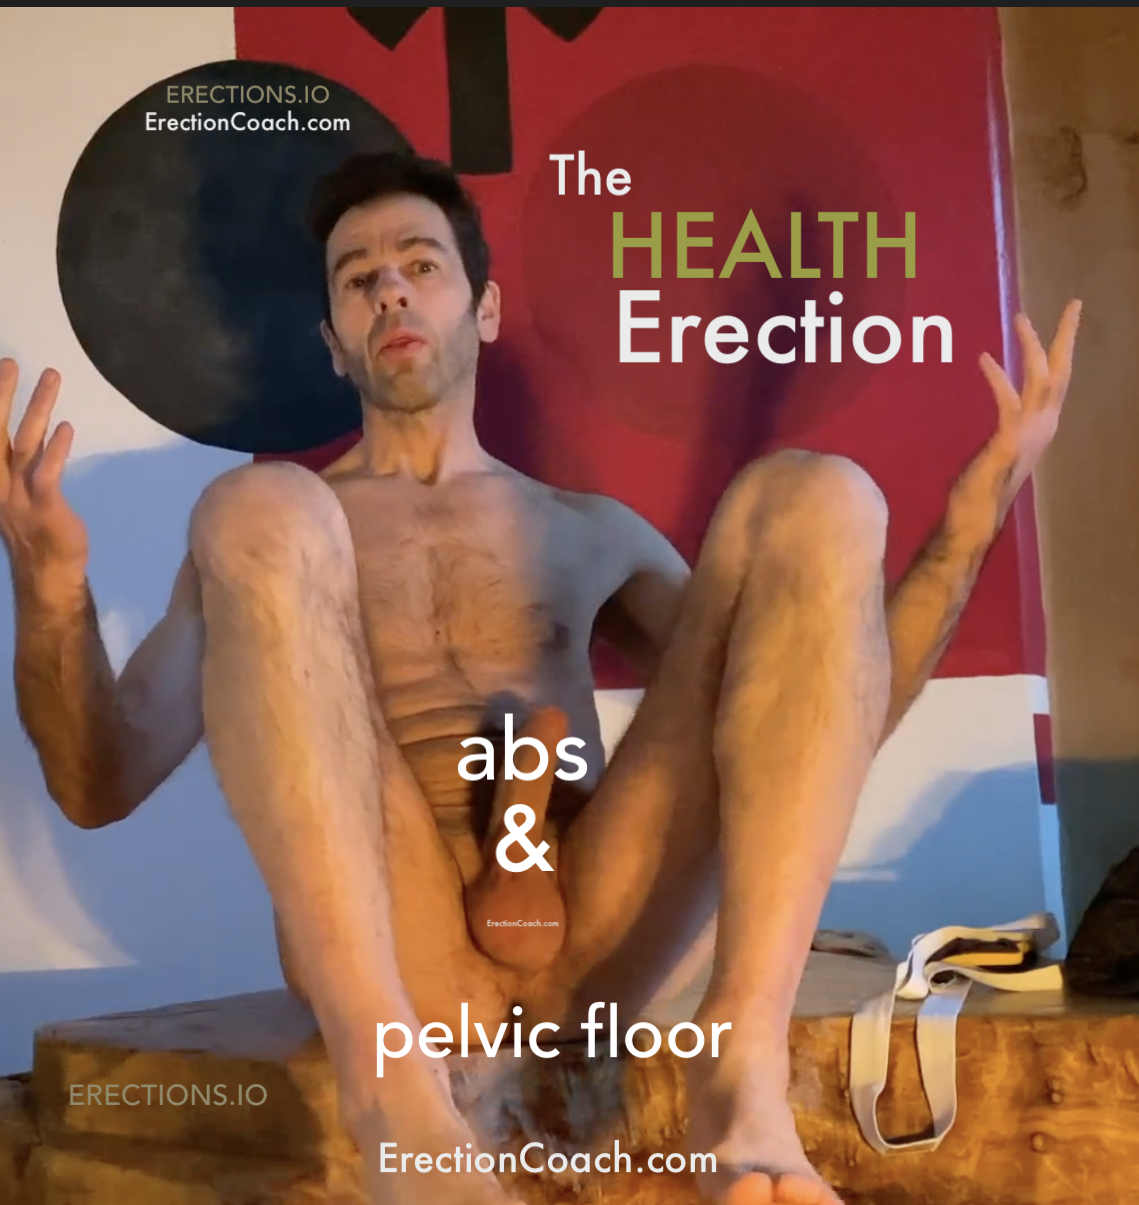 naked man sitting on wood block raising his bent legs either side of erect penis that points upwards and testicles shown below with some text over penis 